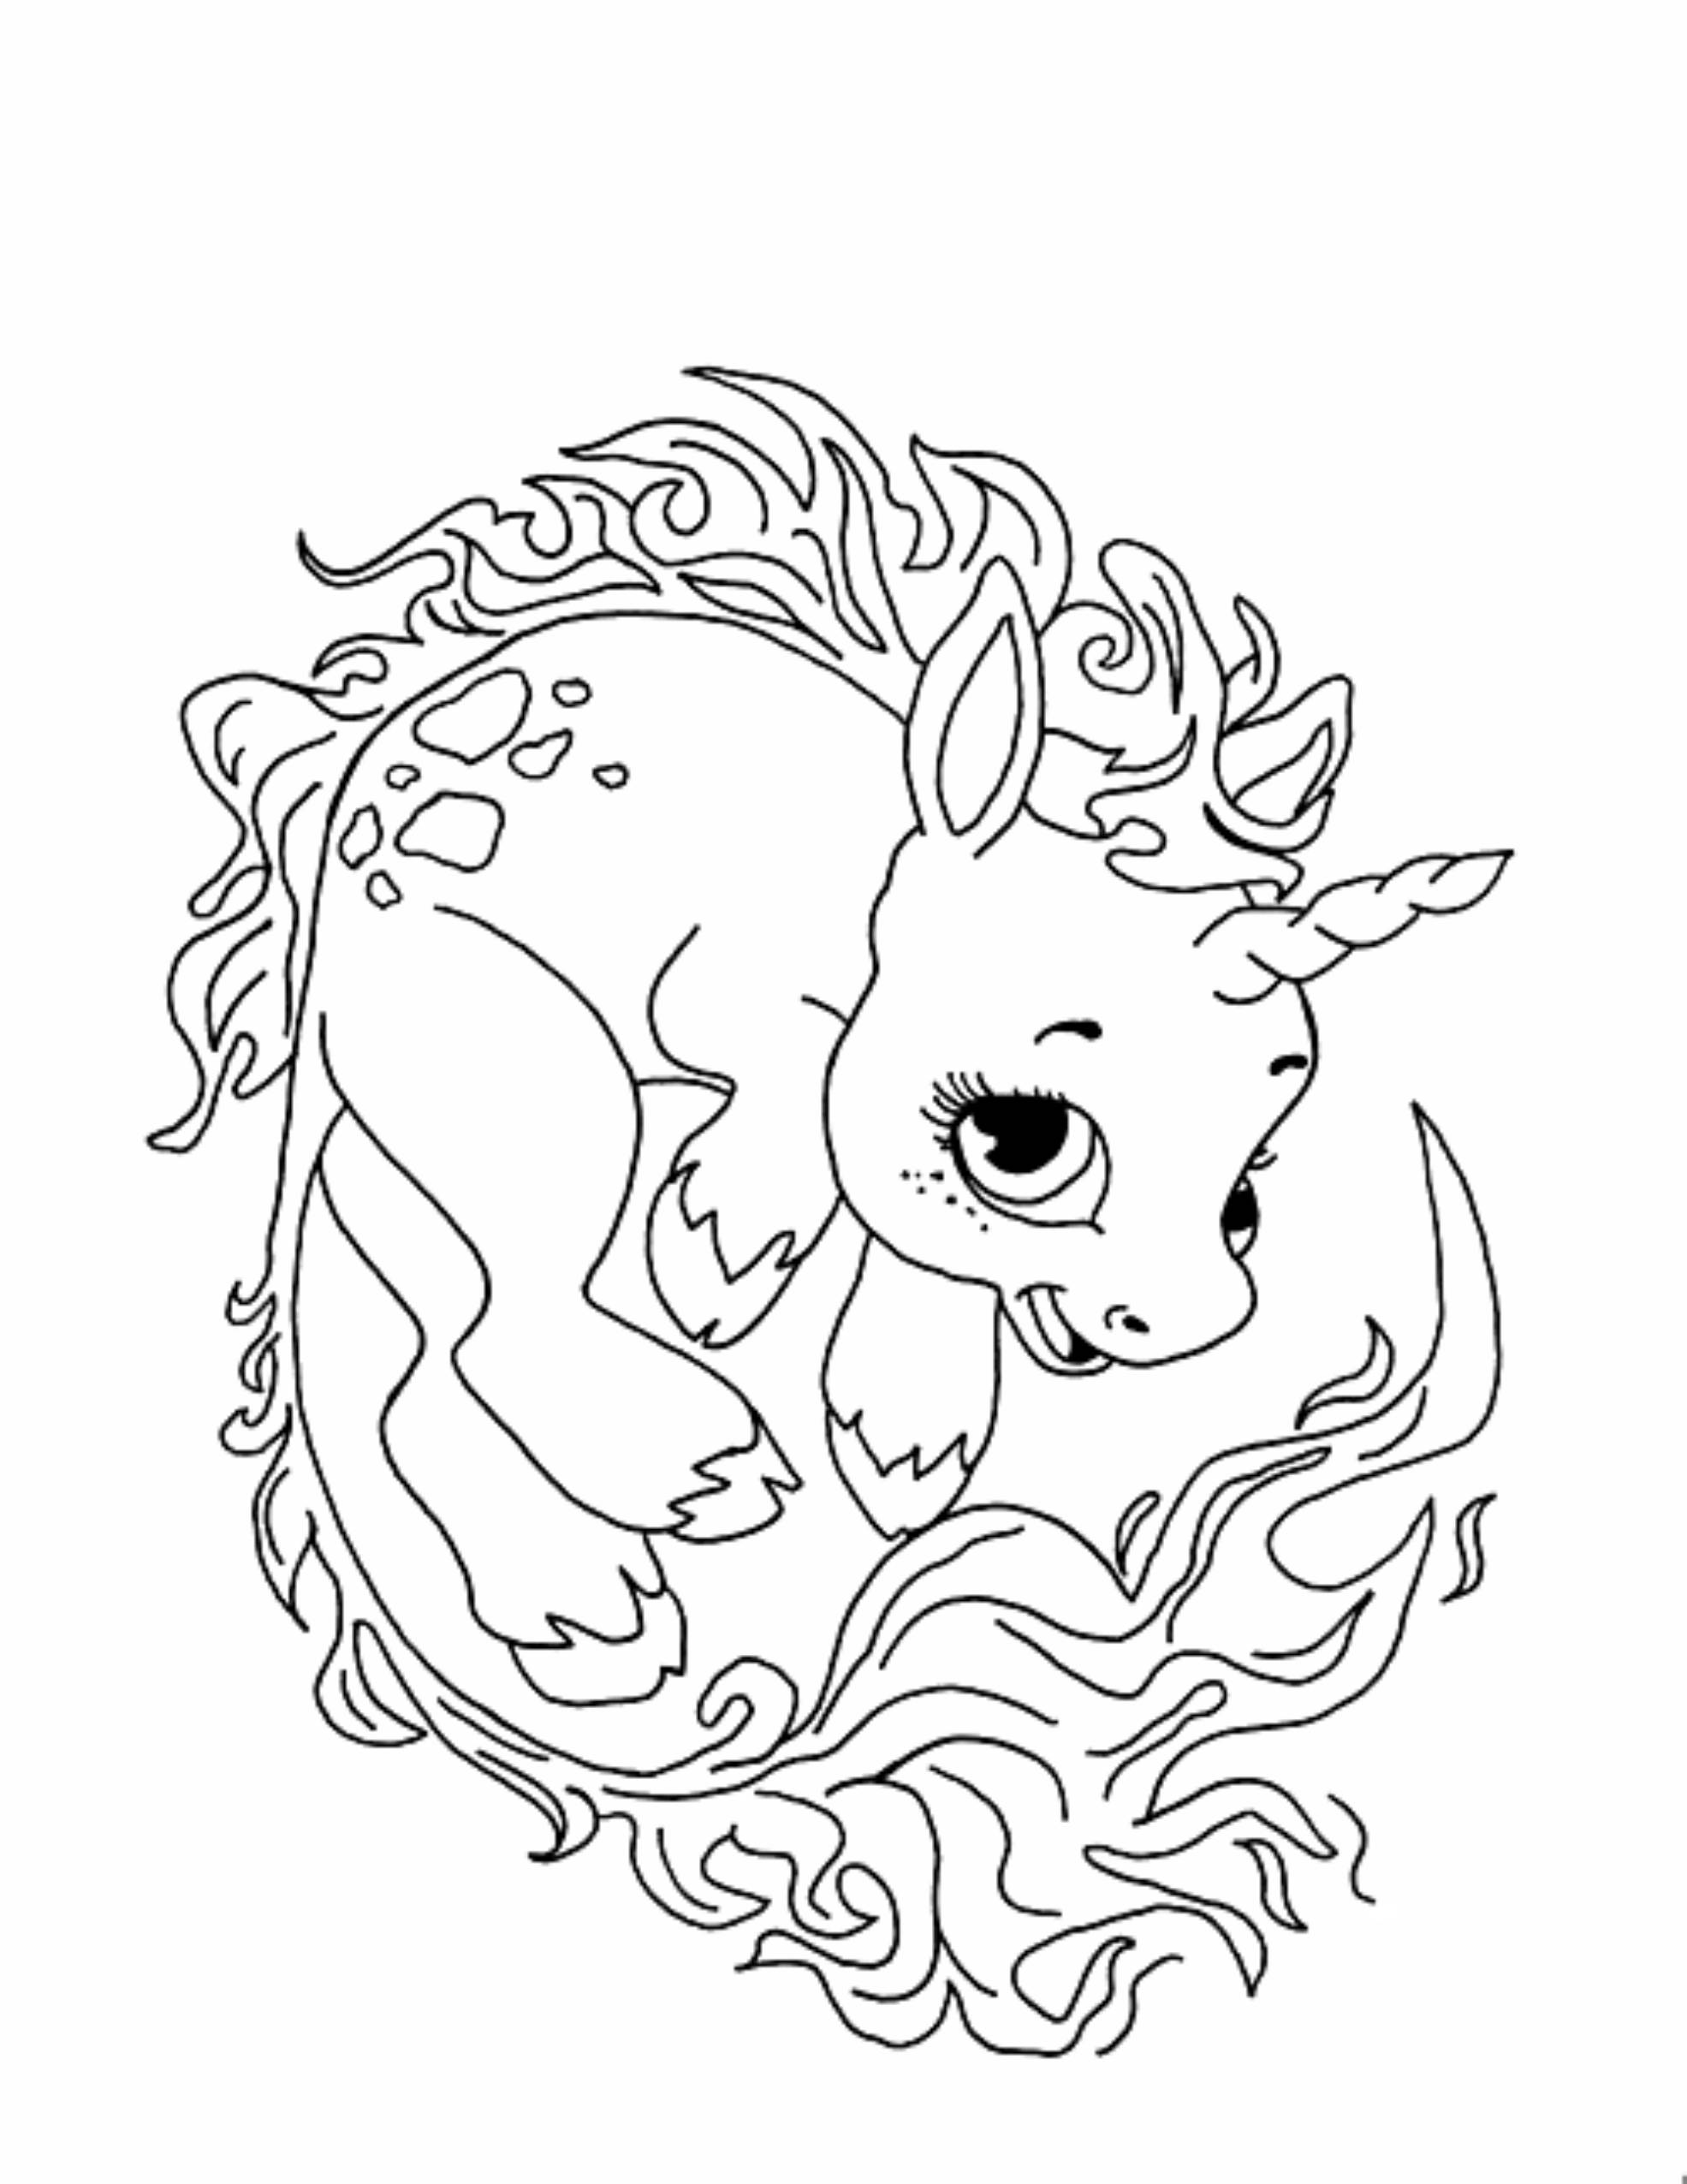 Free Unicorn Coloring Pages For Adults Download Free Clip Art Free Clip Art On Clipart Library